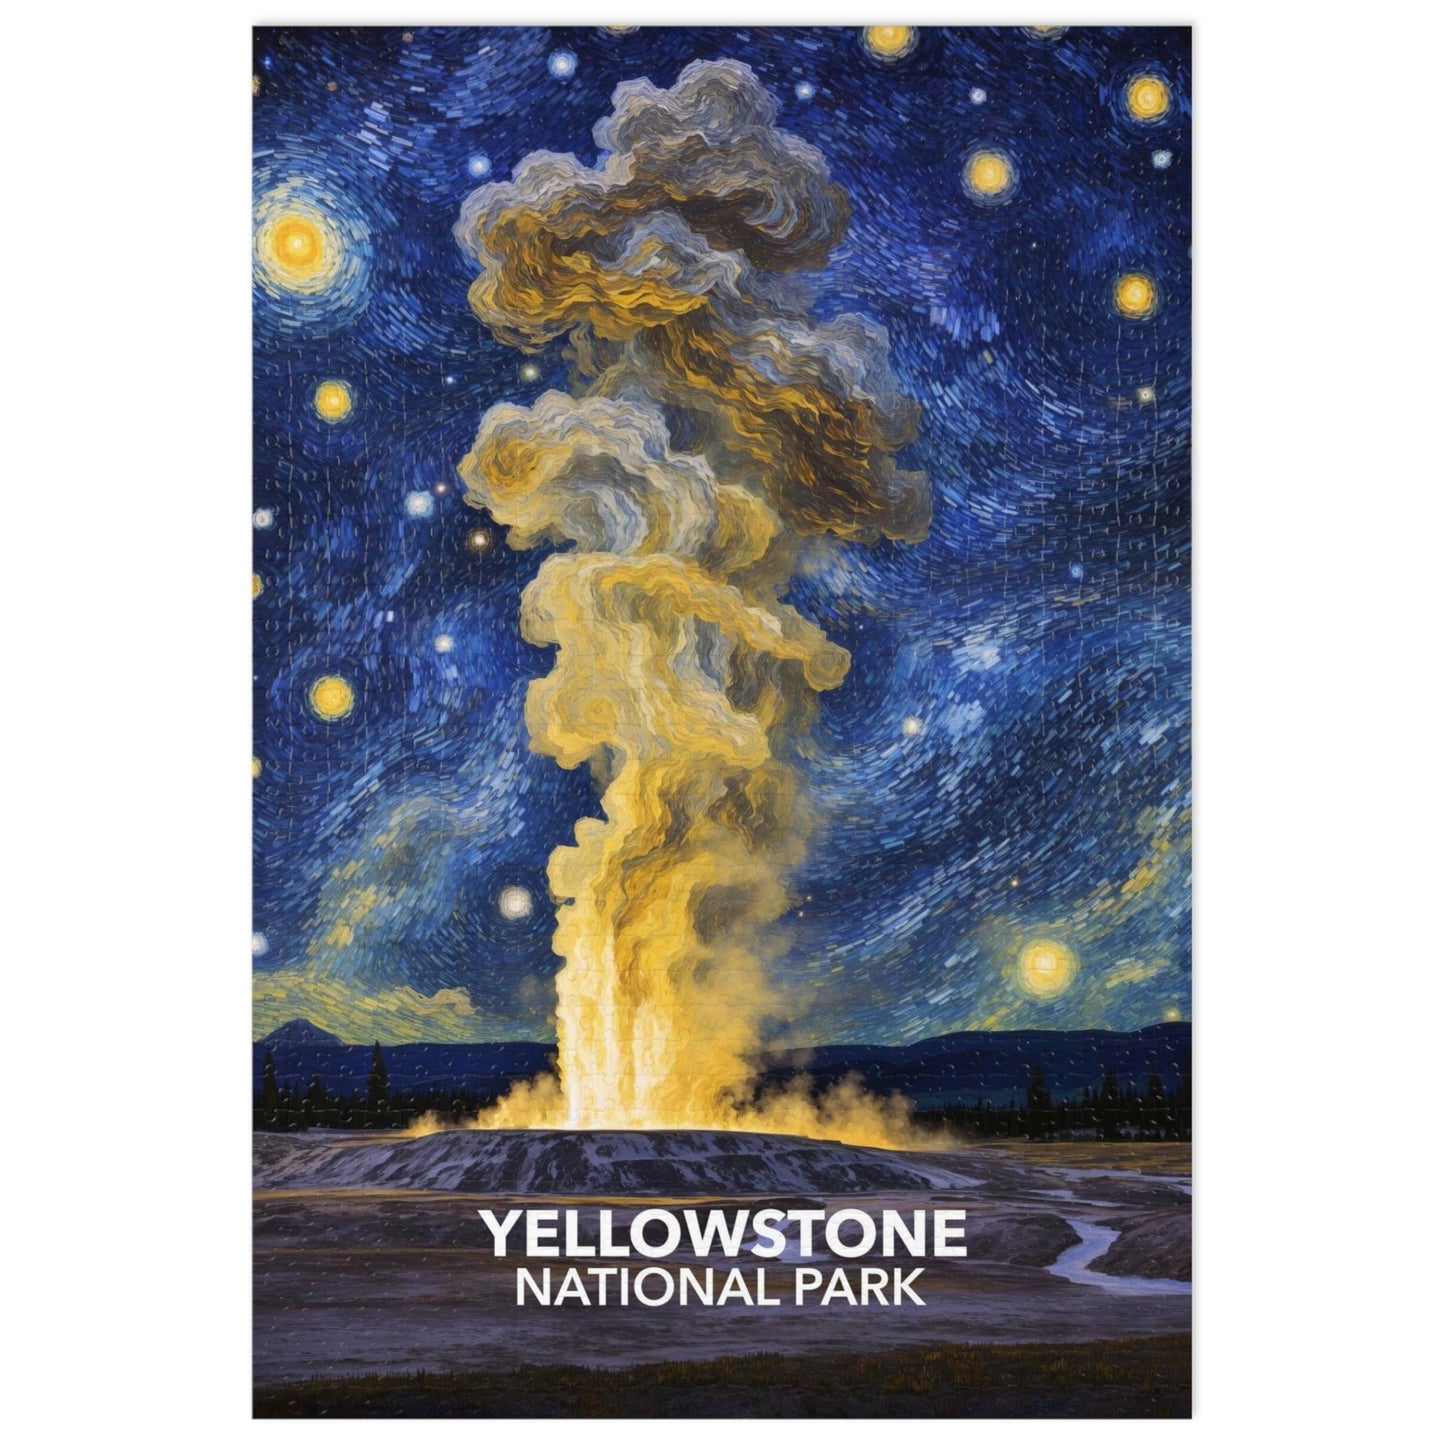 Yellowstone National Park Jigsaw Puzzle - The Starry Night